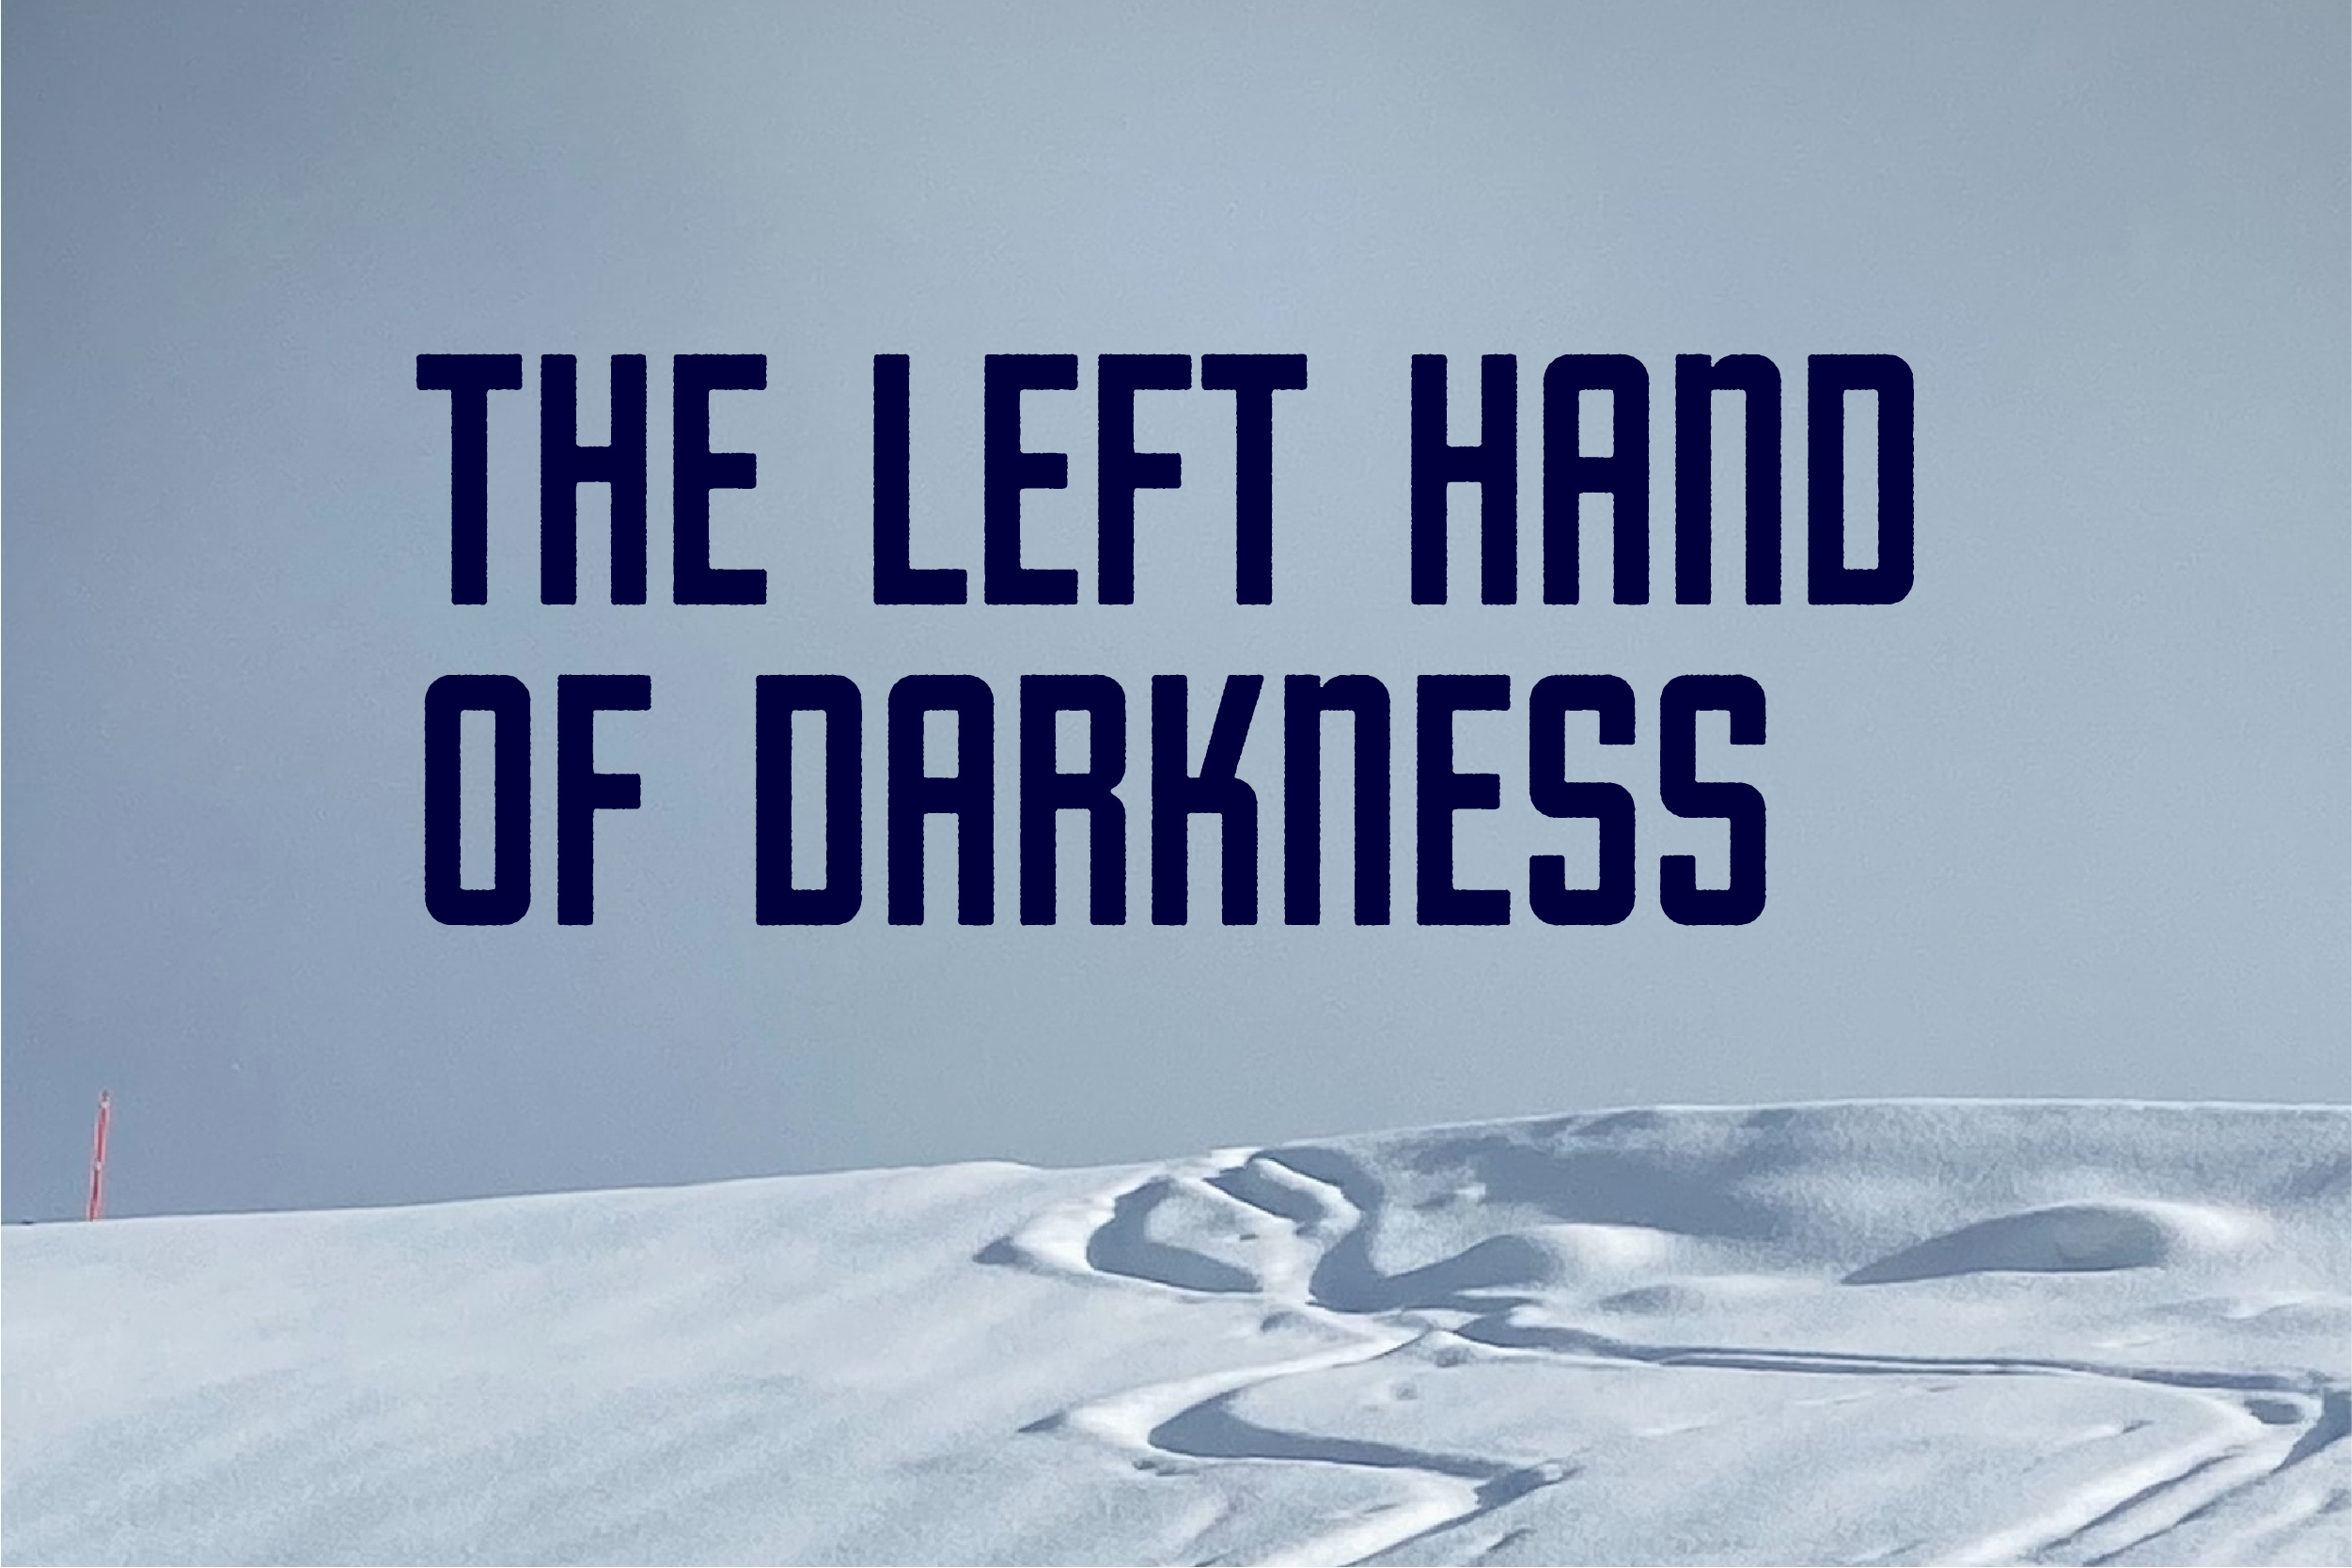 Snow-covered hill with text saying "The Left Hand of Darkness"